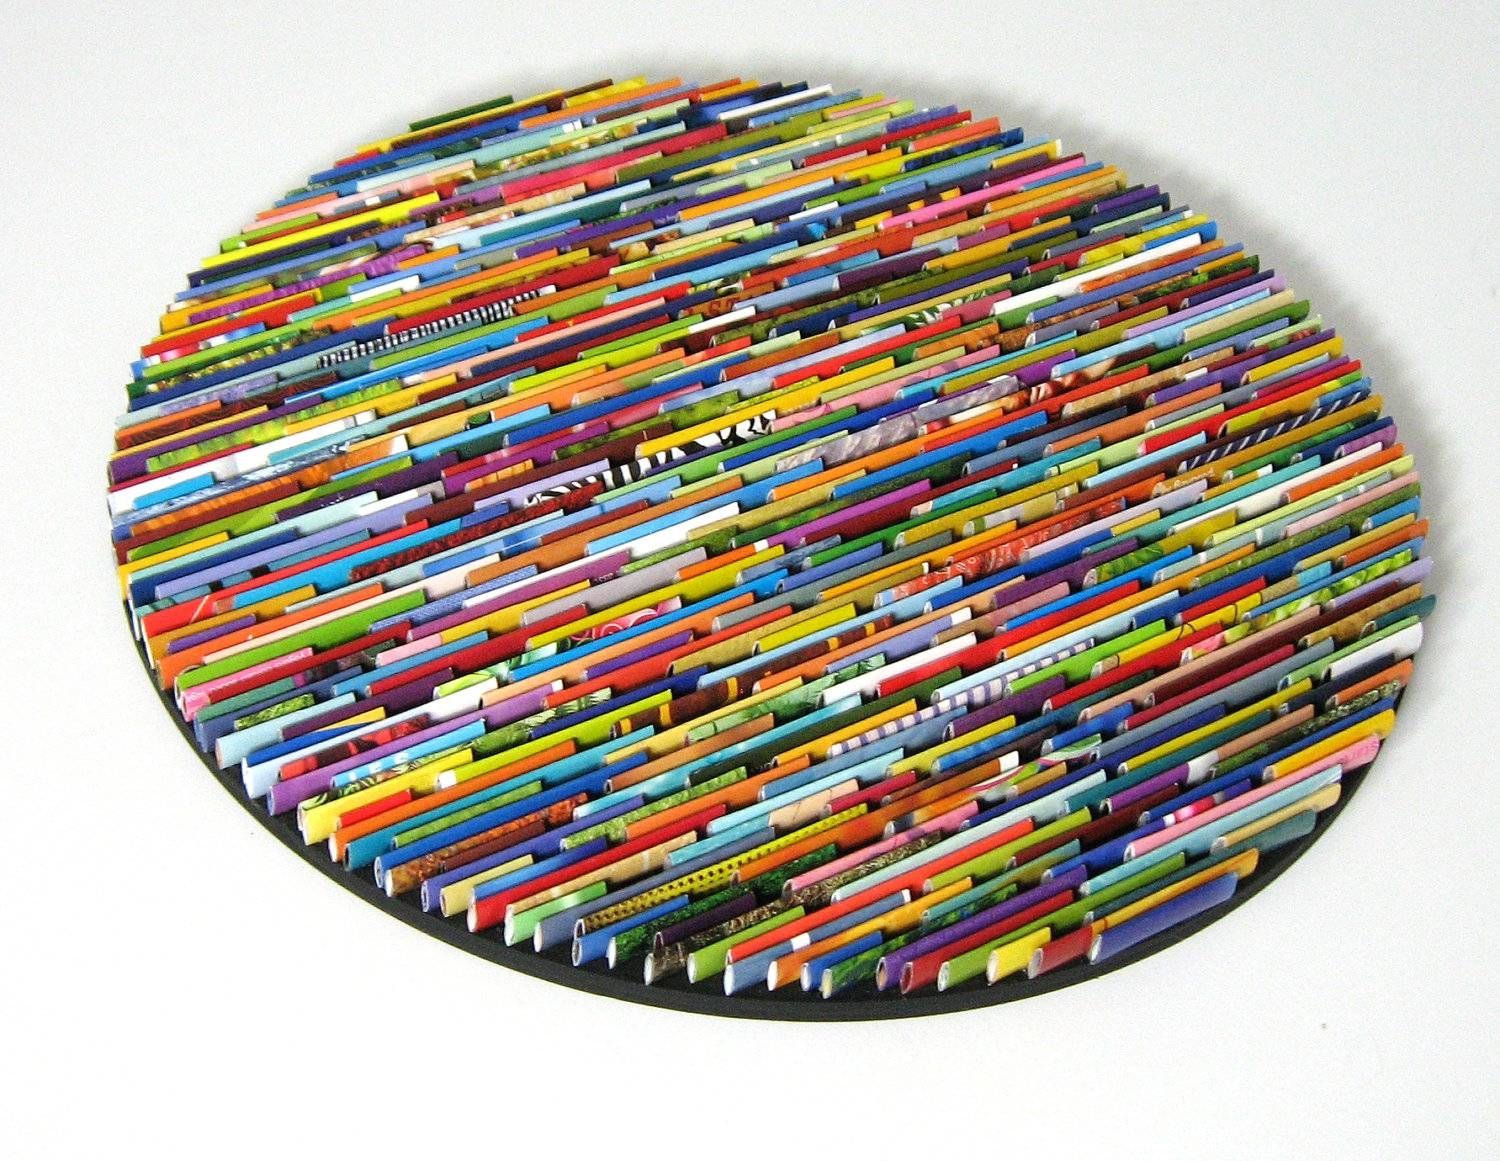 Bright And Colorful Round Wall Art Made From Recycled Pertaining To Current Recycled Wall Art (View 1 of 30)